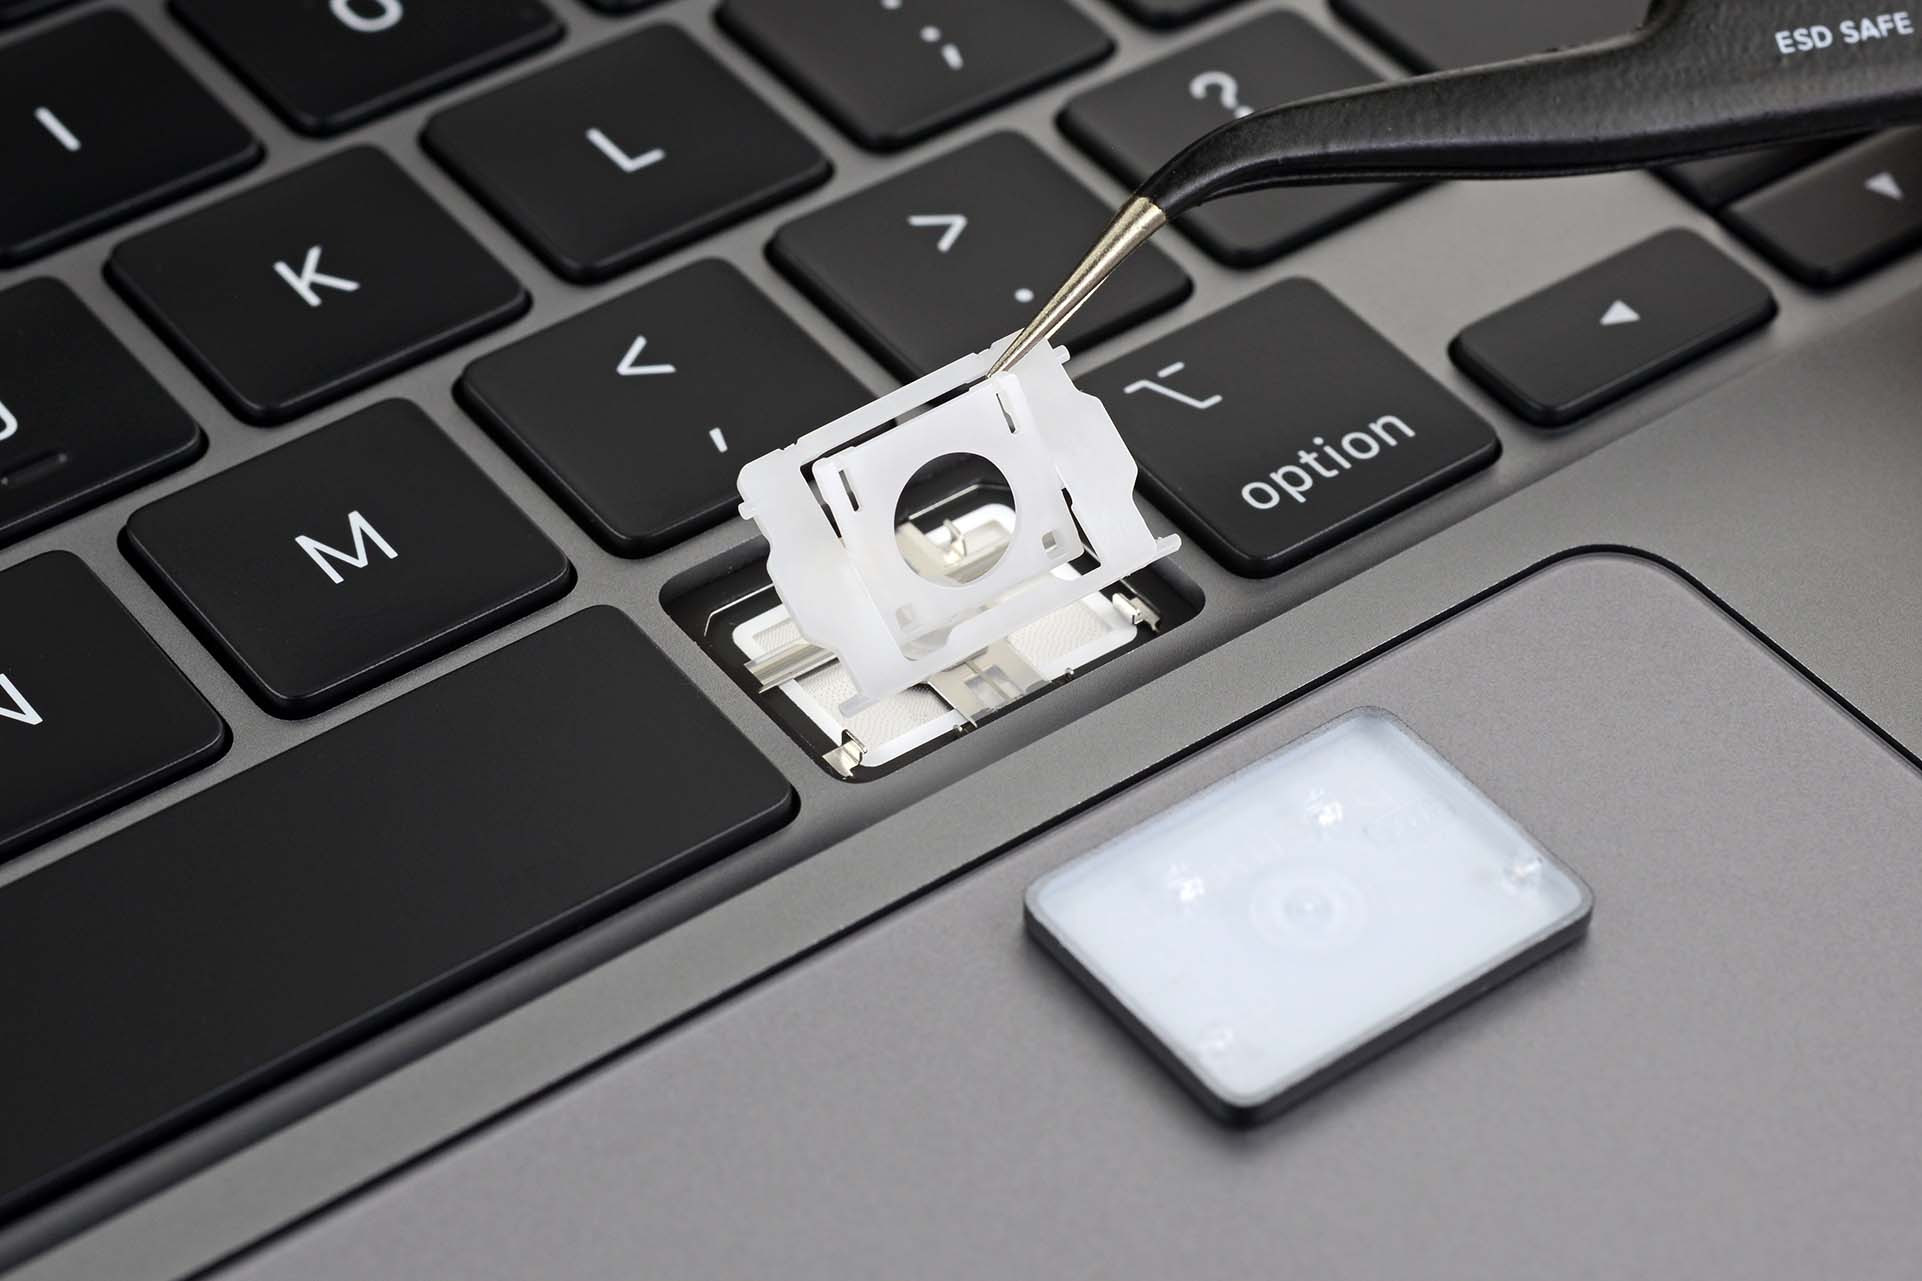 How to connect, configure and use an Apple Wireless Keyboard to a PC